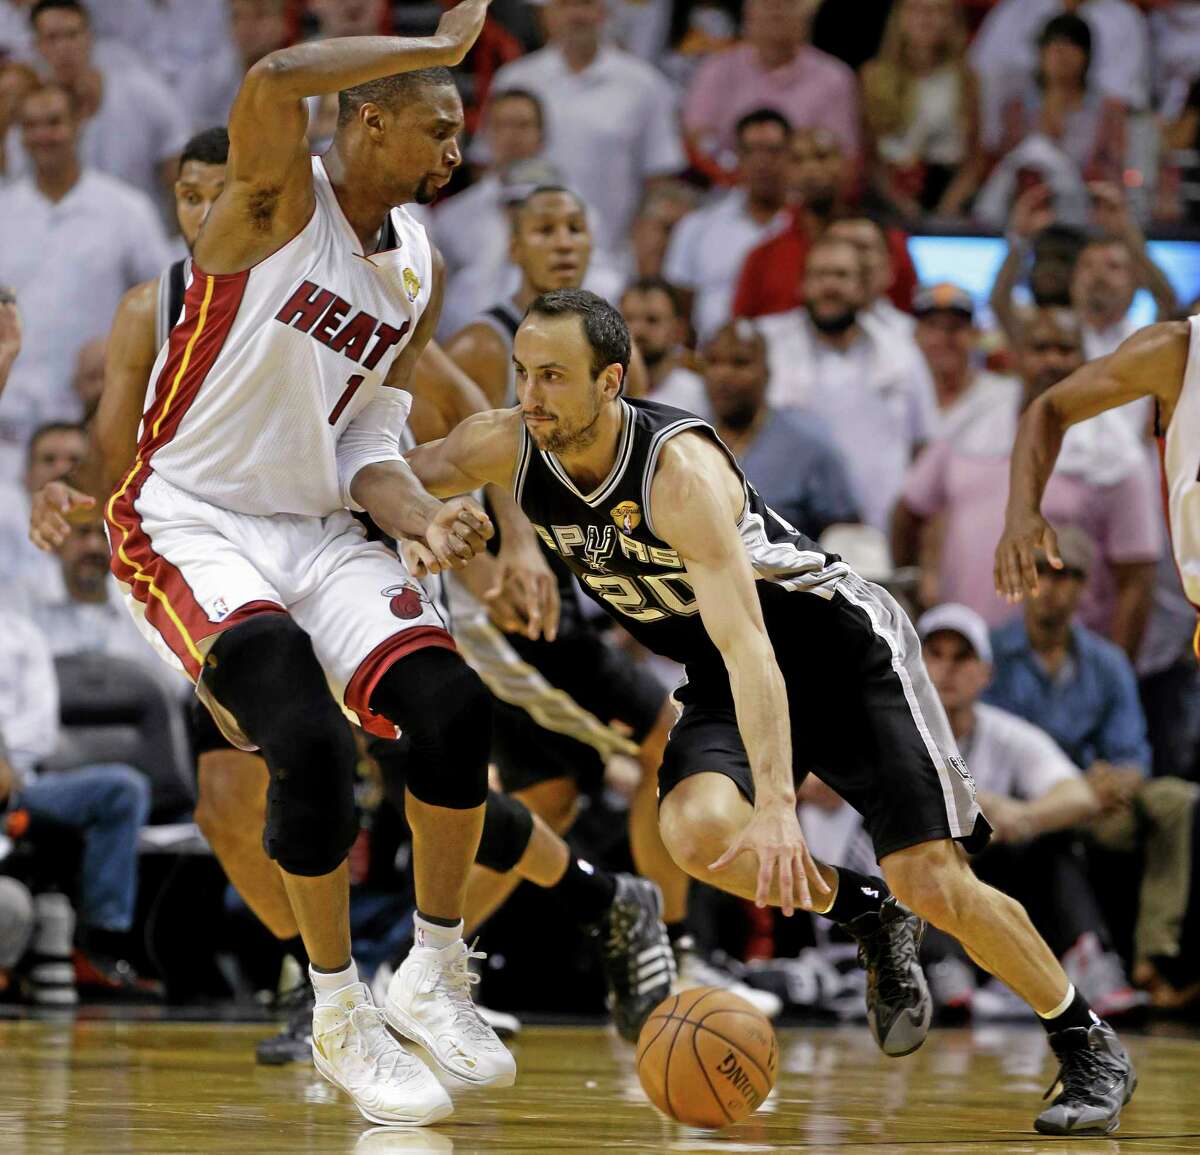 San Antonio Spurs guard Manu Ginobili (20) dribbles past Miami Heat center Chris Bosh (1) during the second half in Game 4 of the NBA Finals.